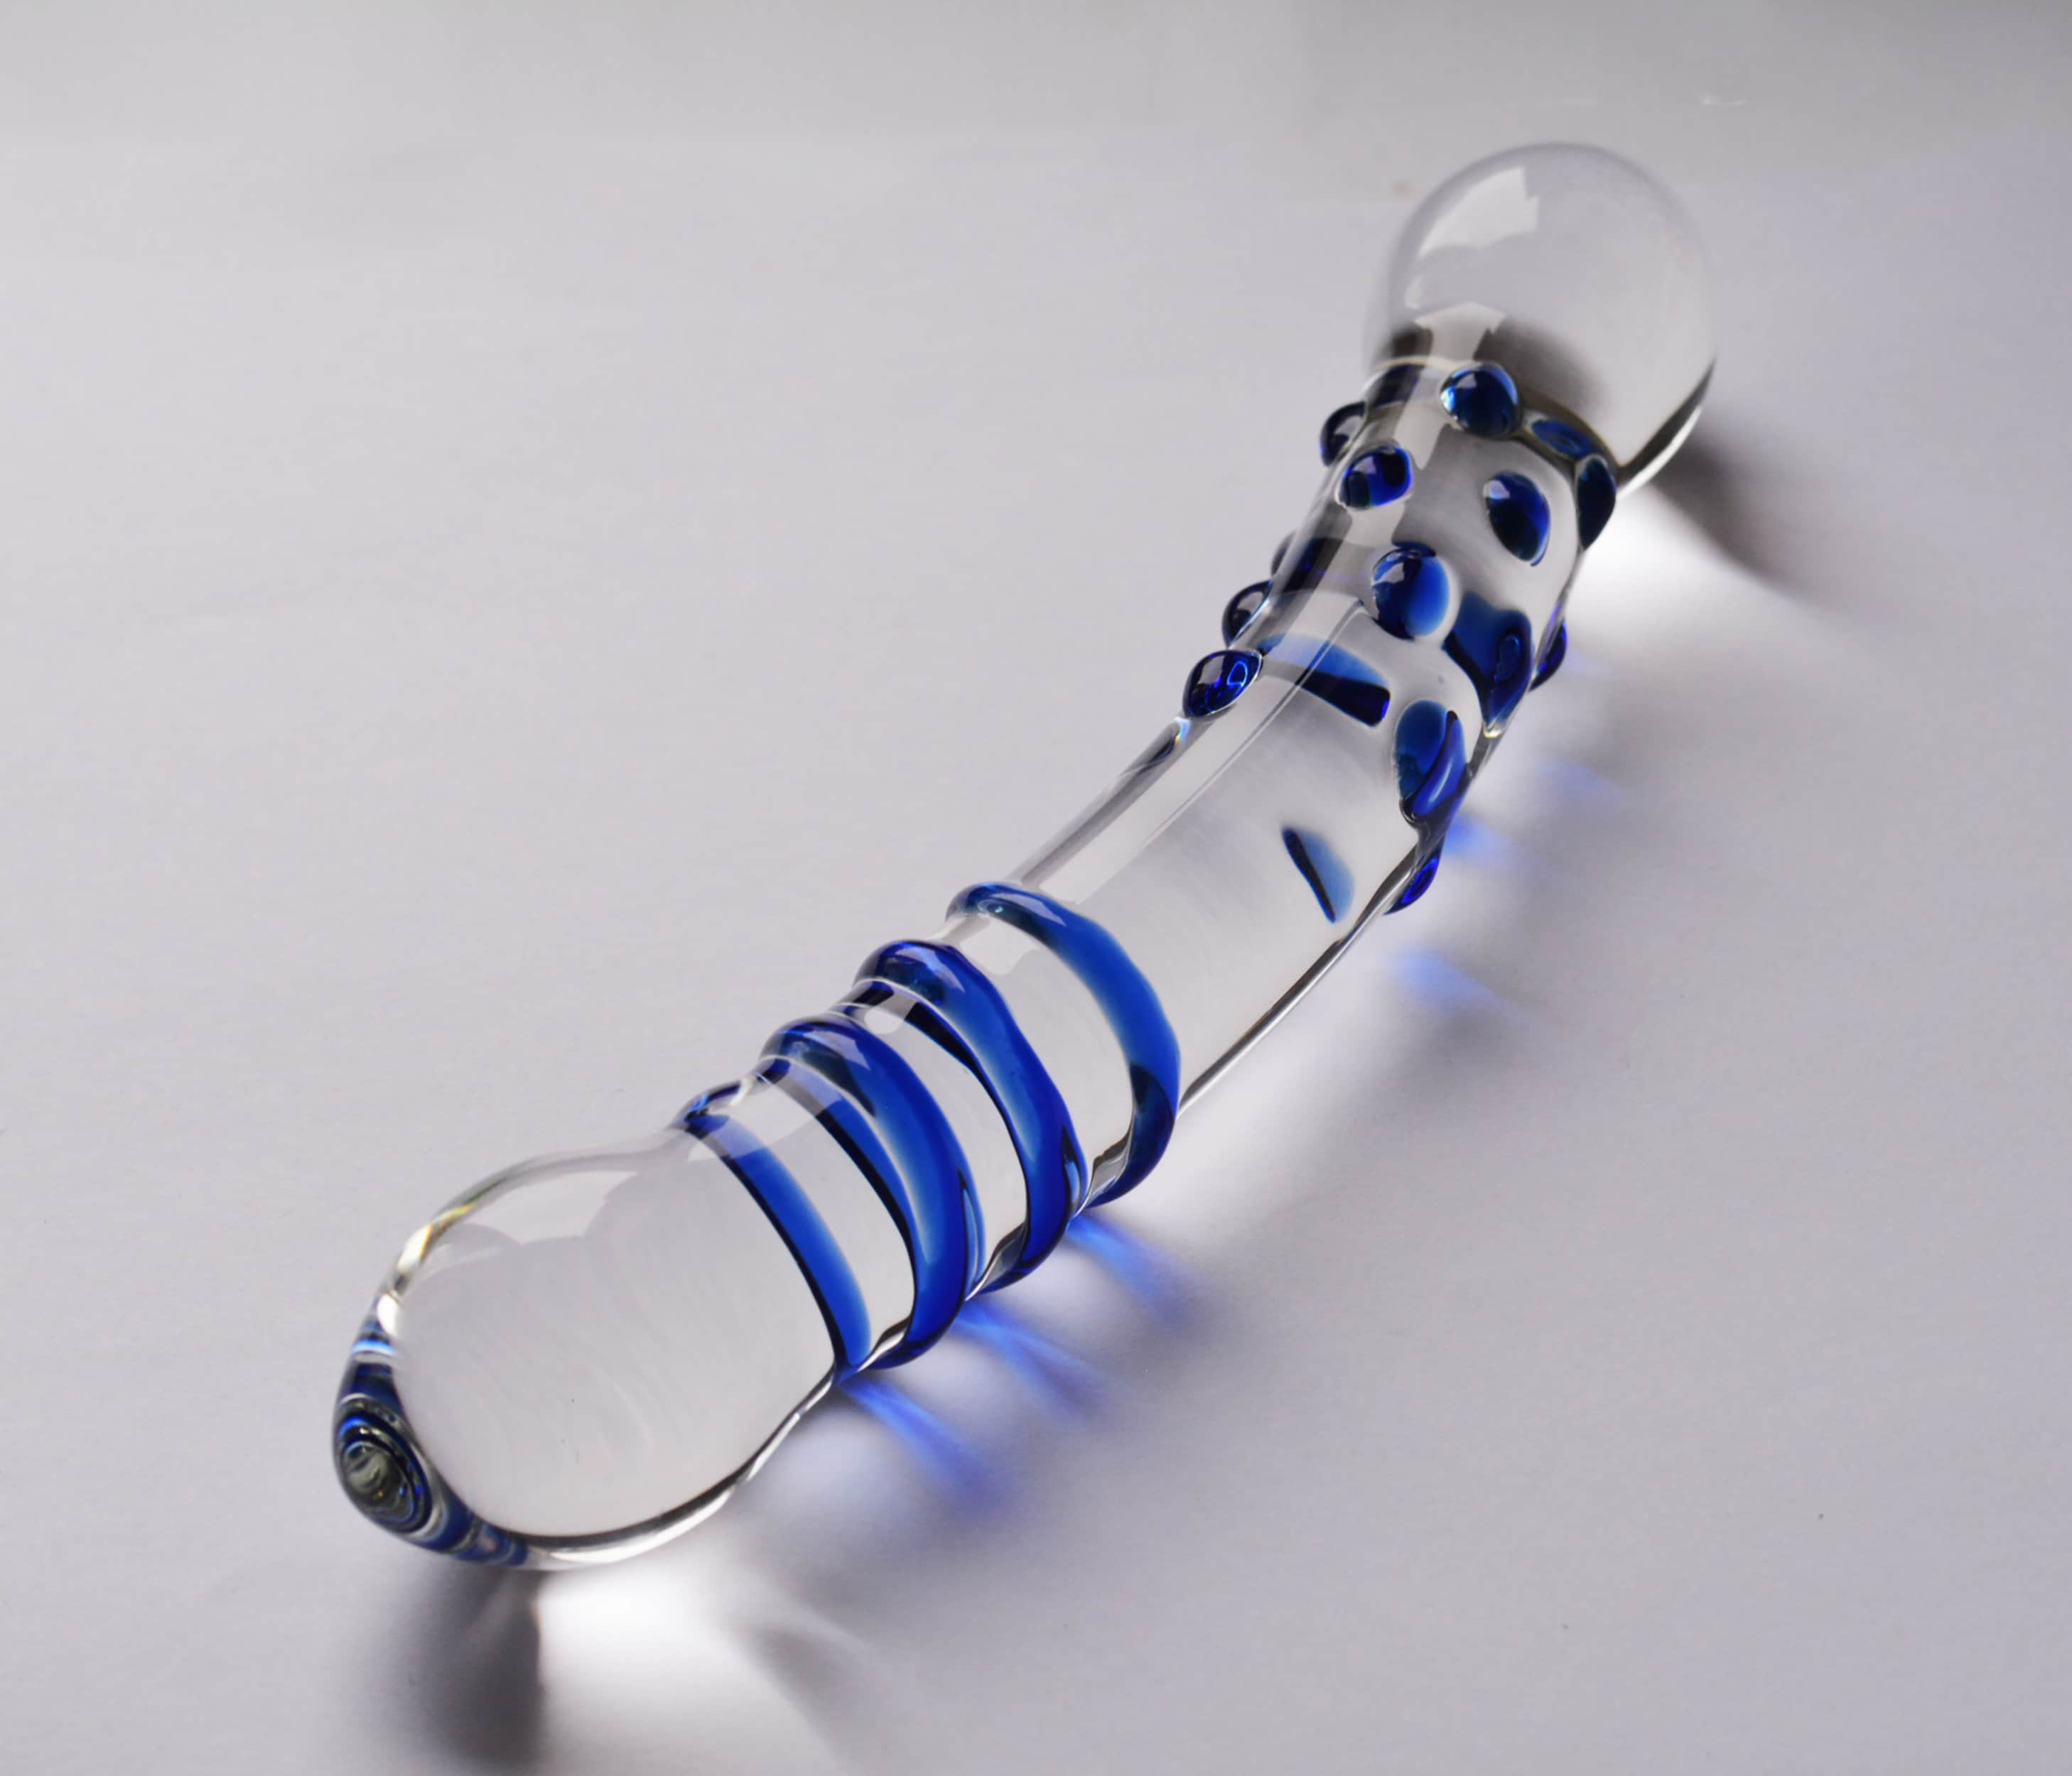 8 Double Dildo Glass Wand Ribbed Clear Blue Spiral Glass Etsy